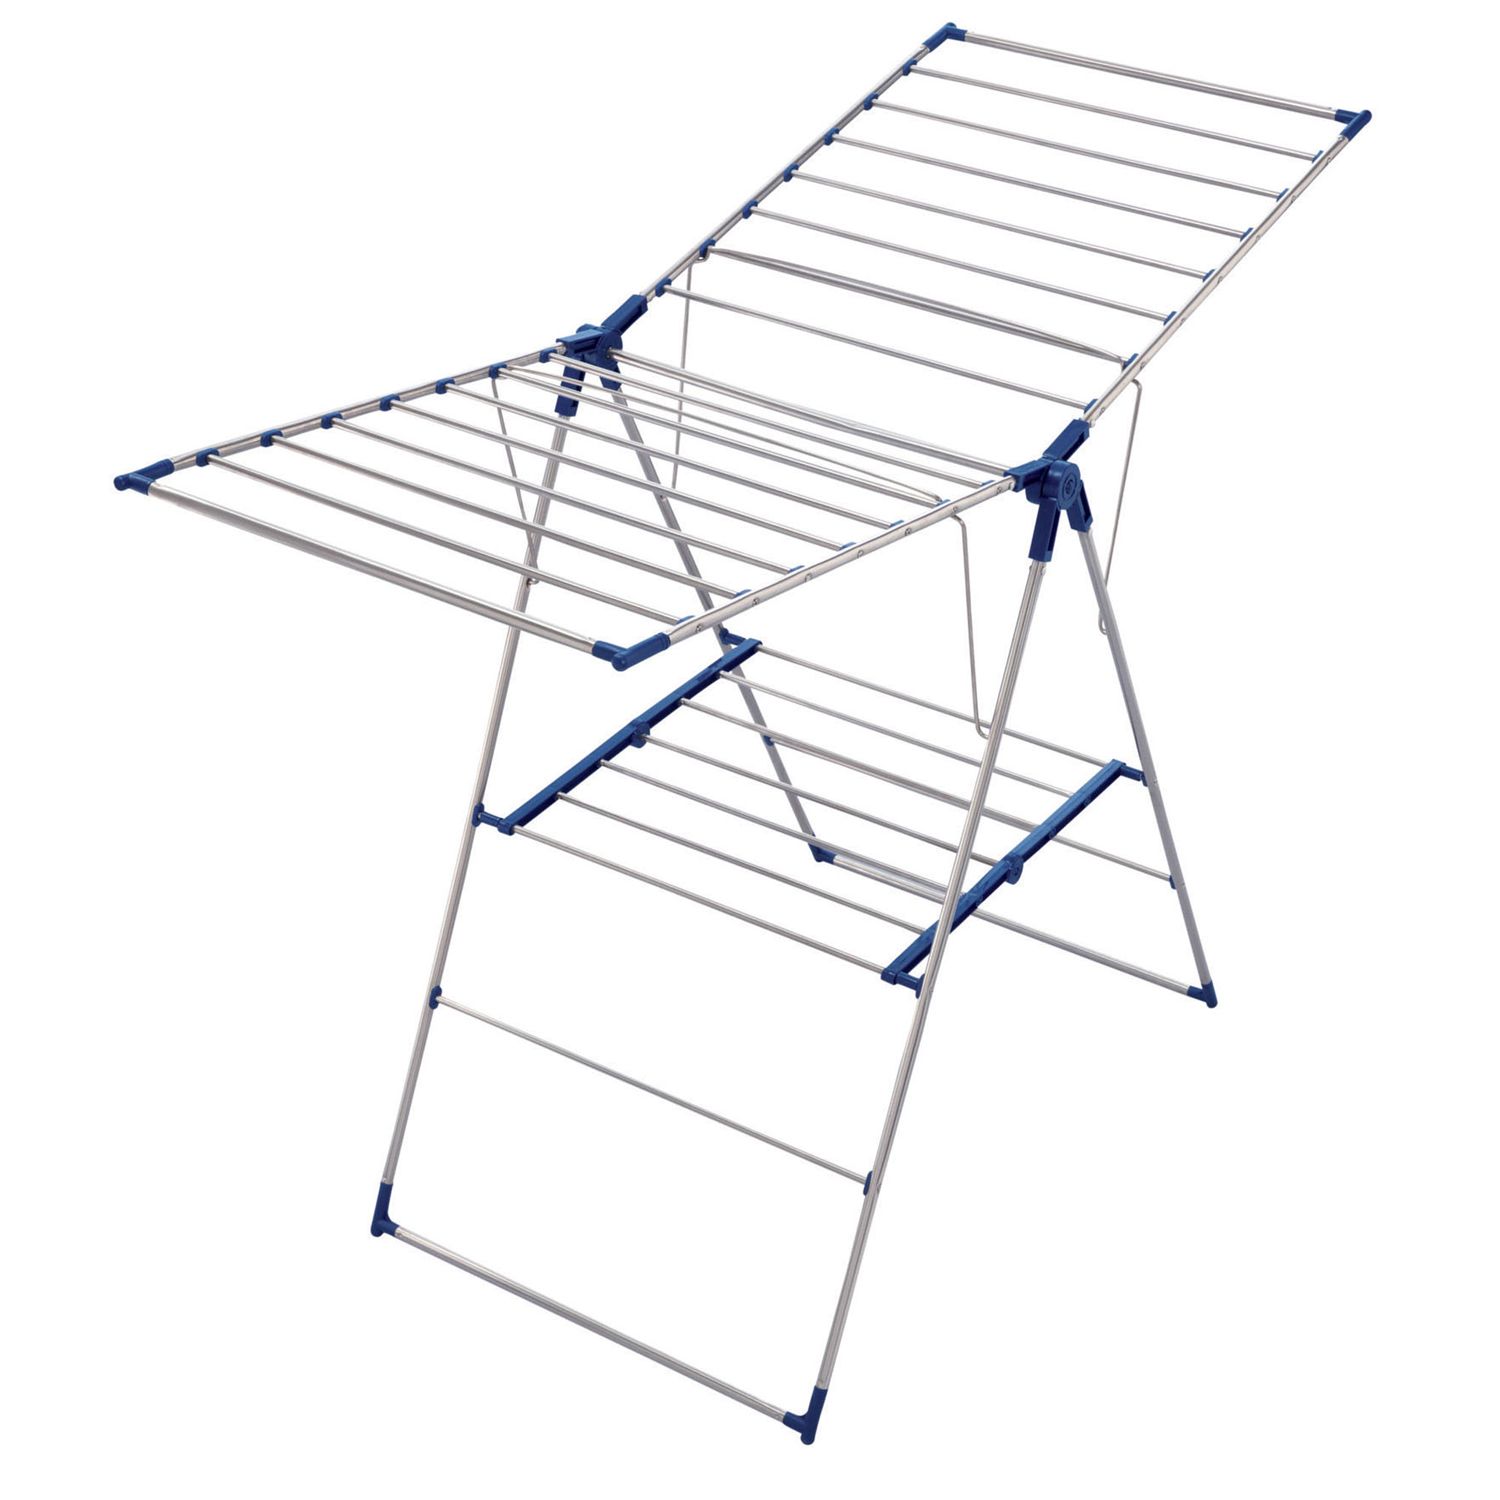 Image for Leifheit Roma 150 Laundry Drying Rack at Kohl's.